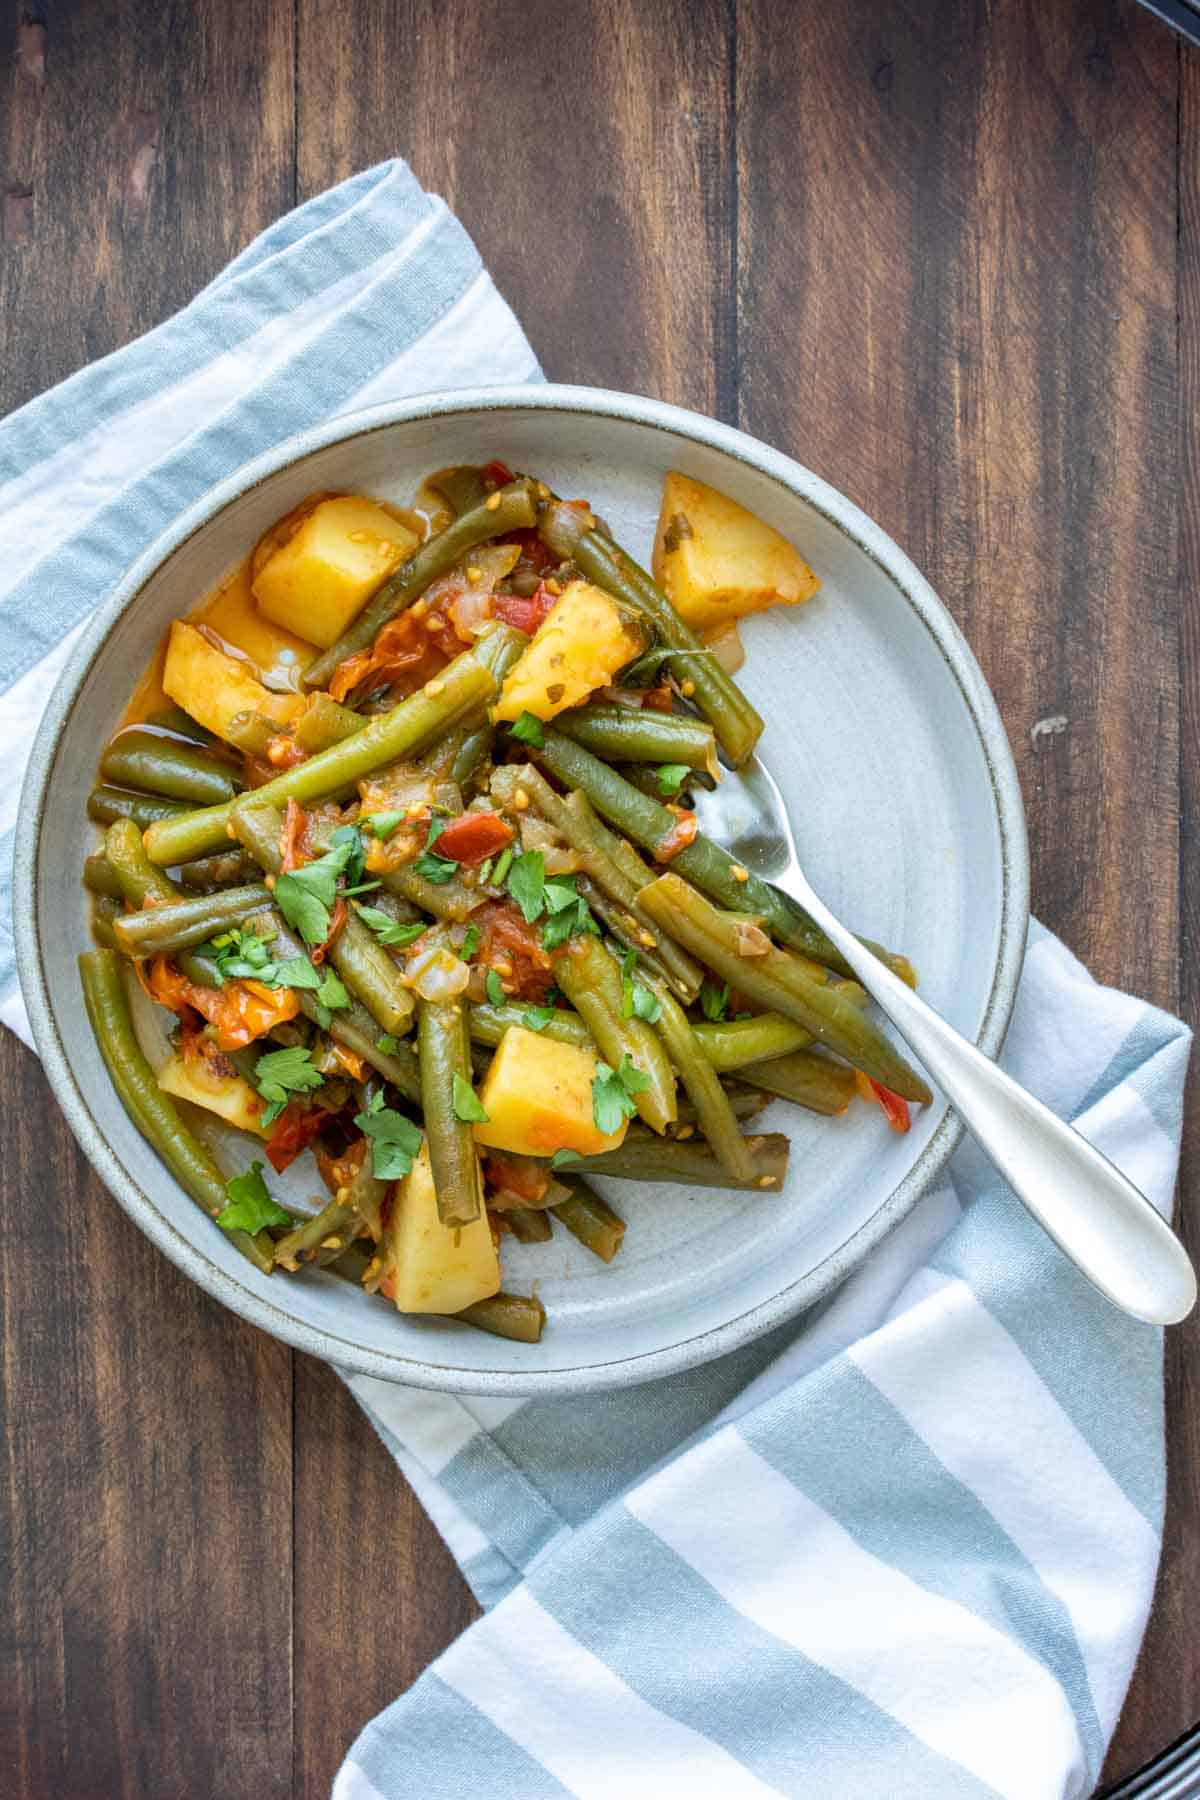 Sautéed green beans with potatoes and tomatoes on a grey plate